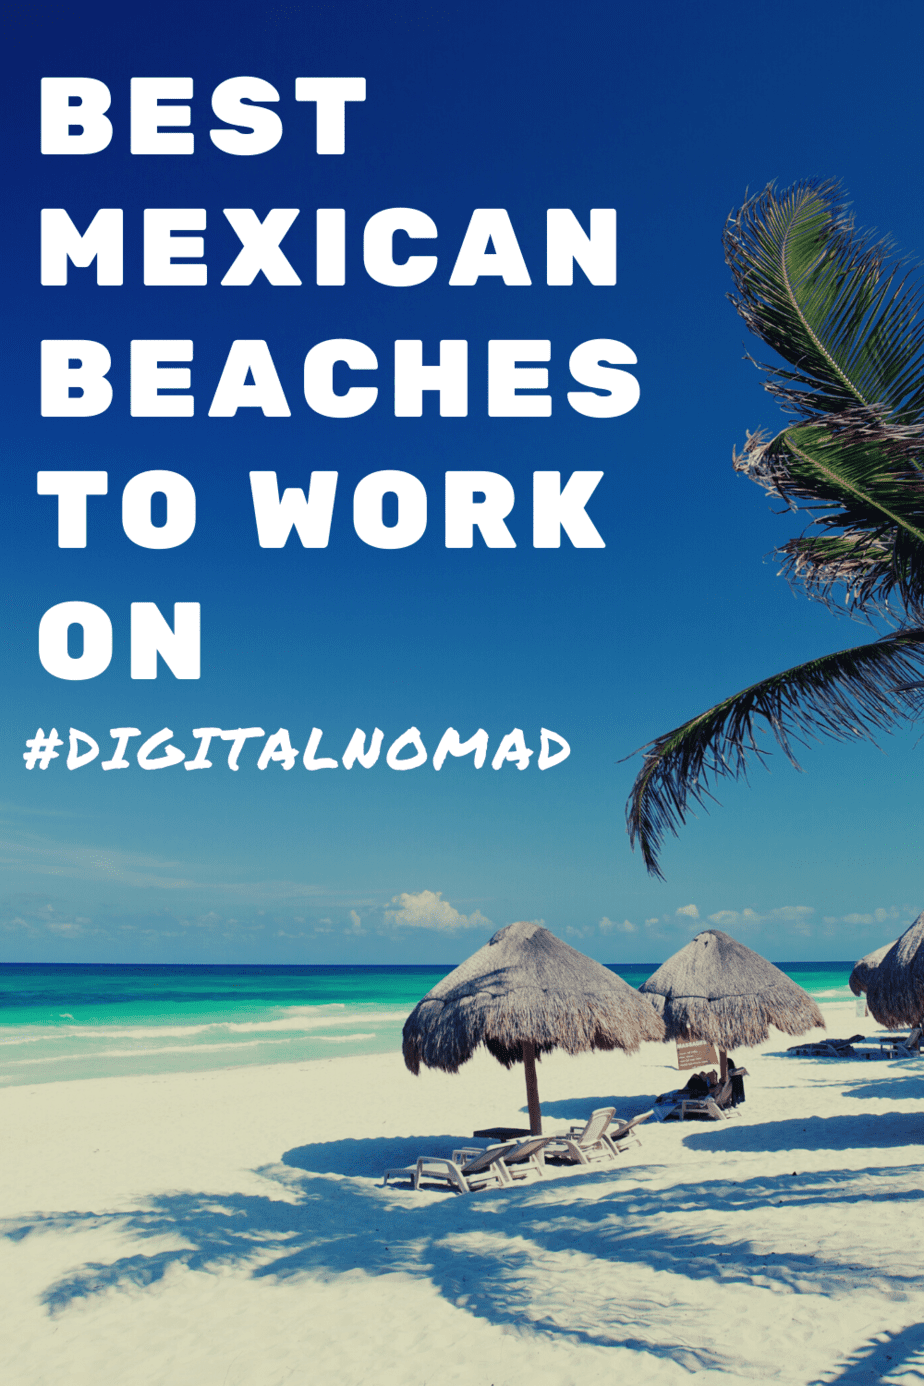 Best beaches to work on in mexico